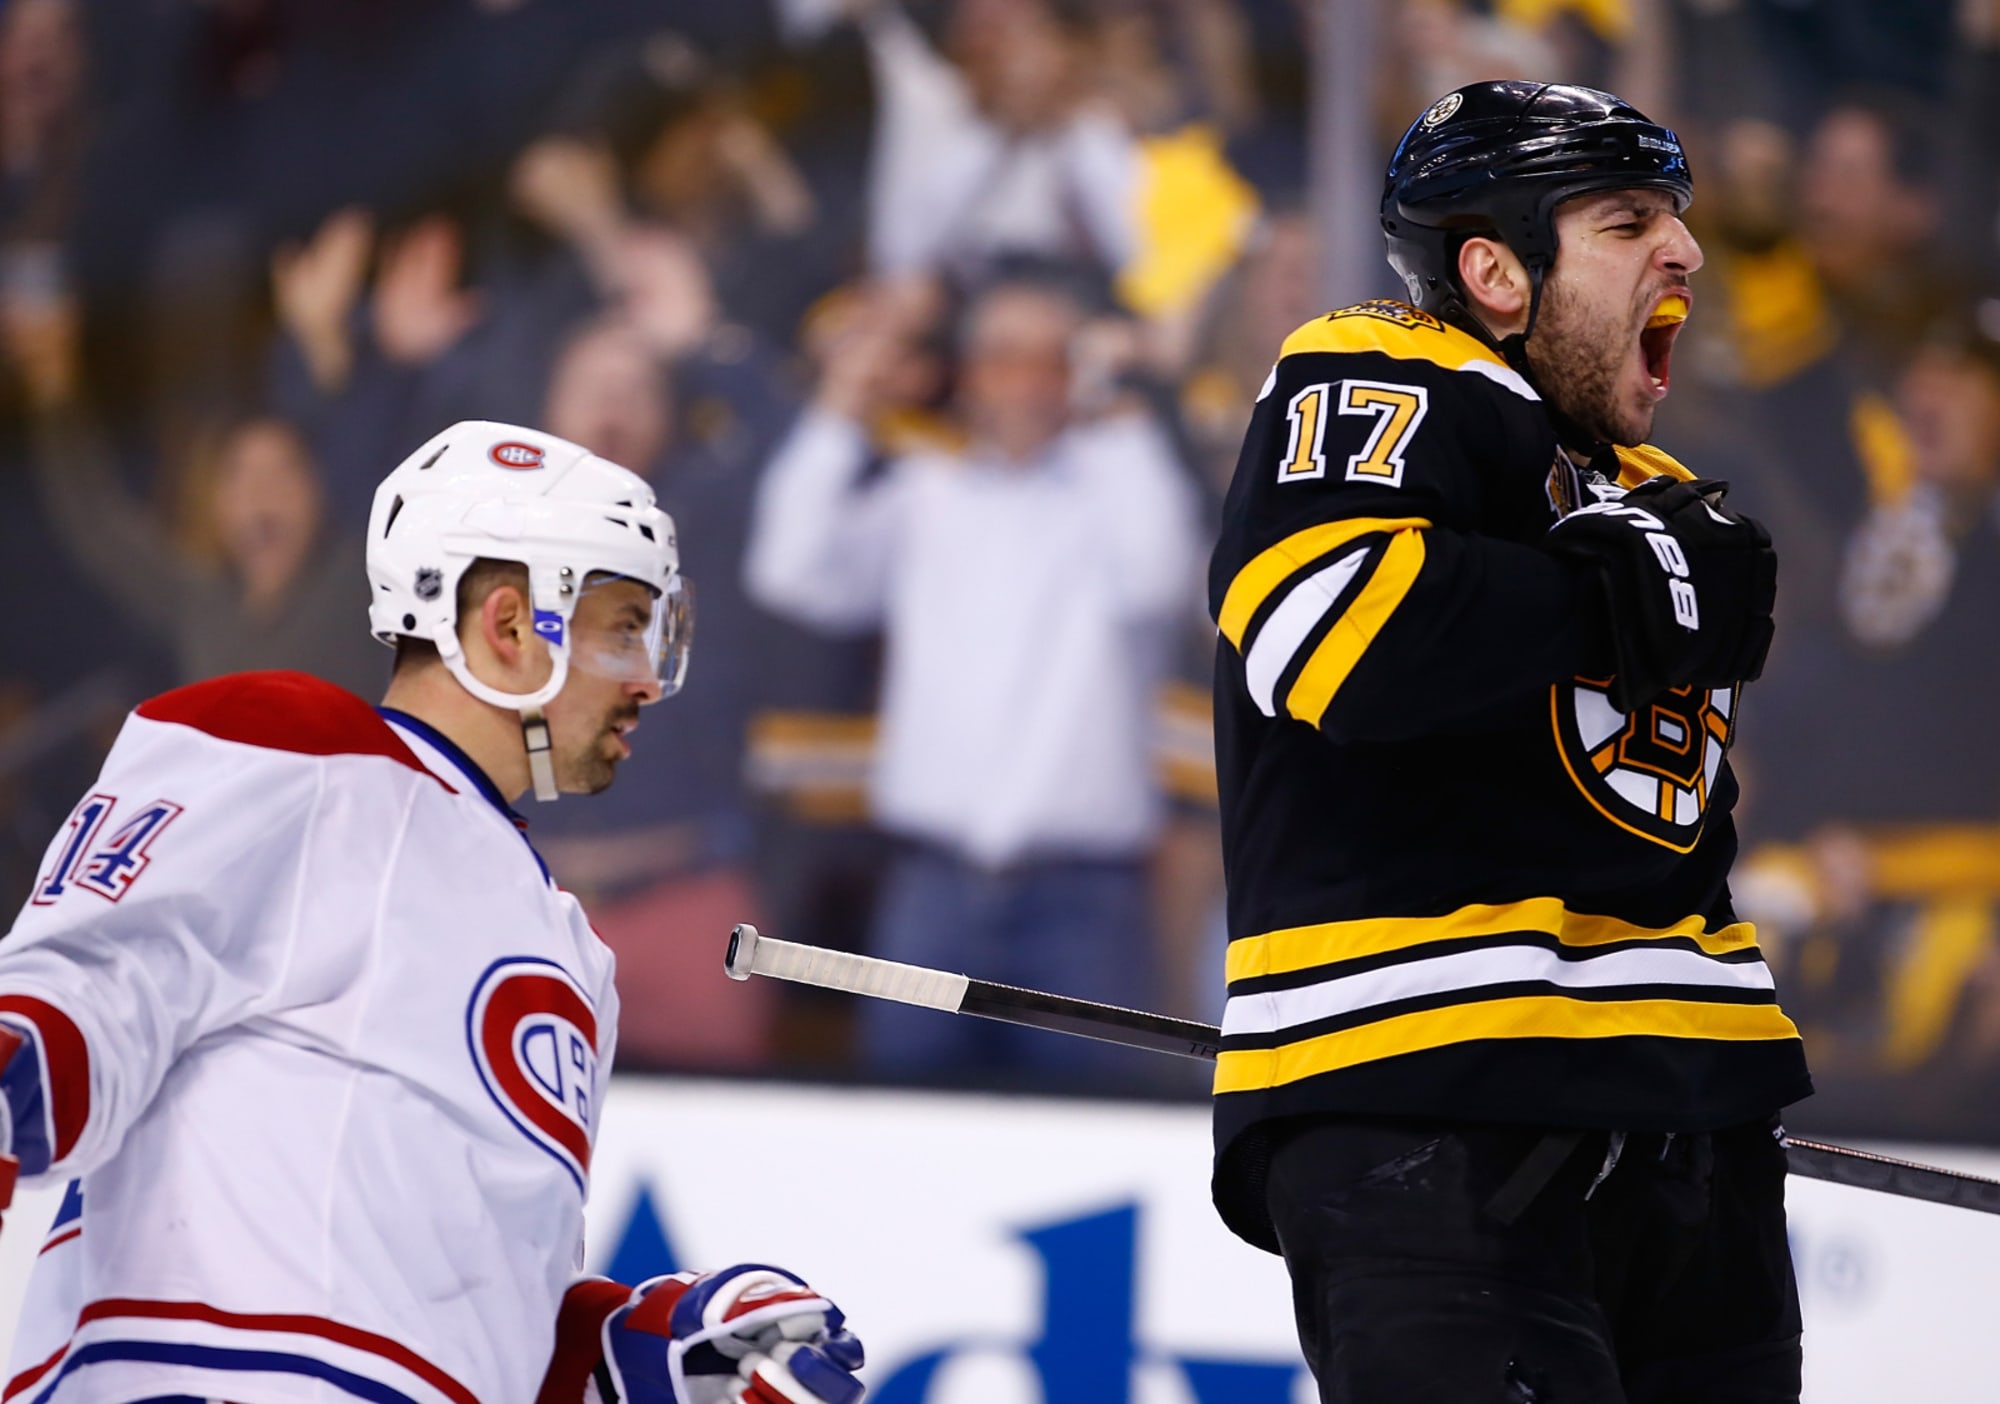 Bruins returning to big, bad, Bruins' ways with return of Lucic